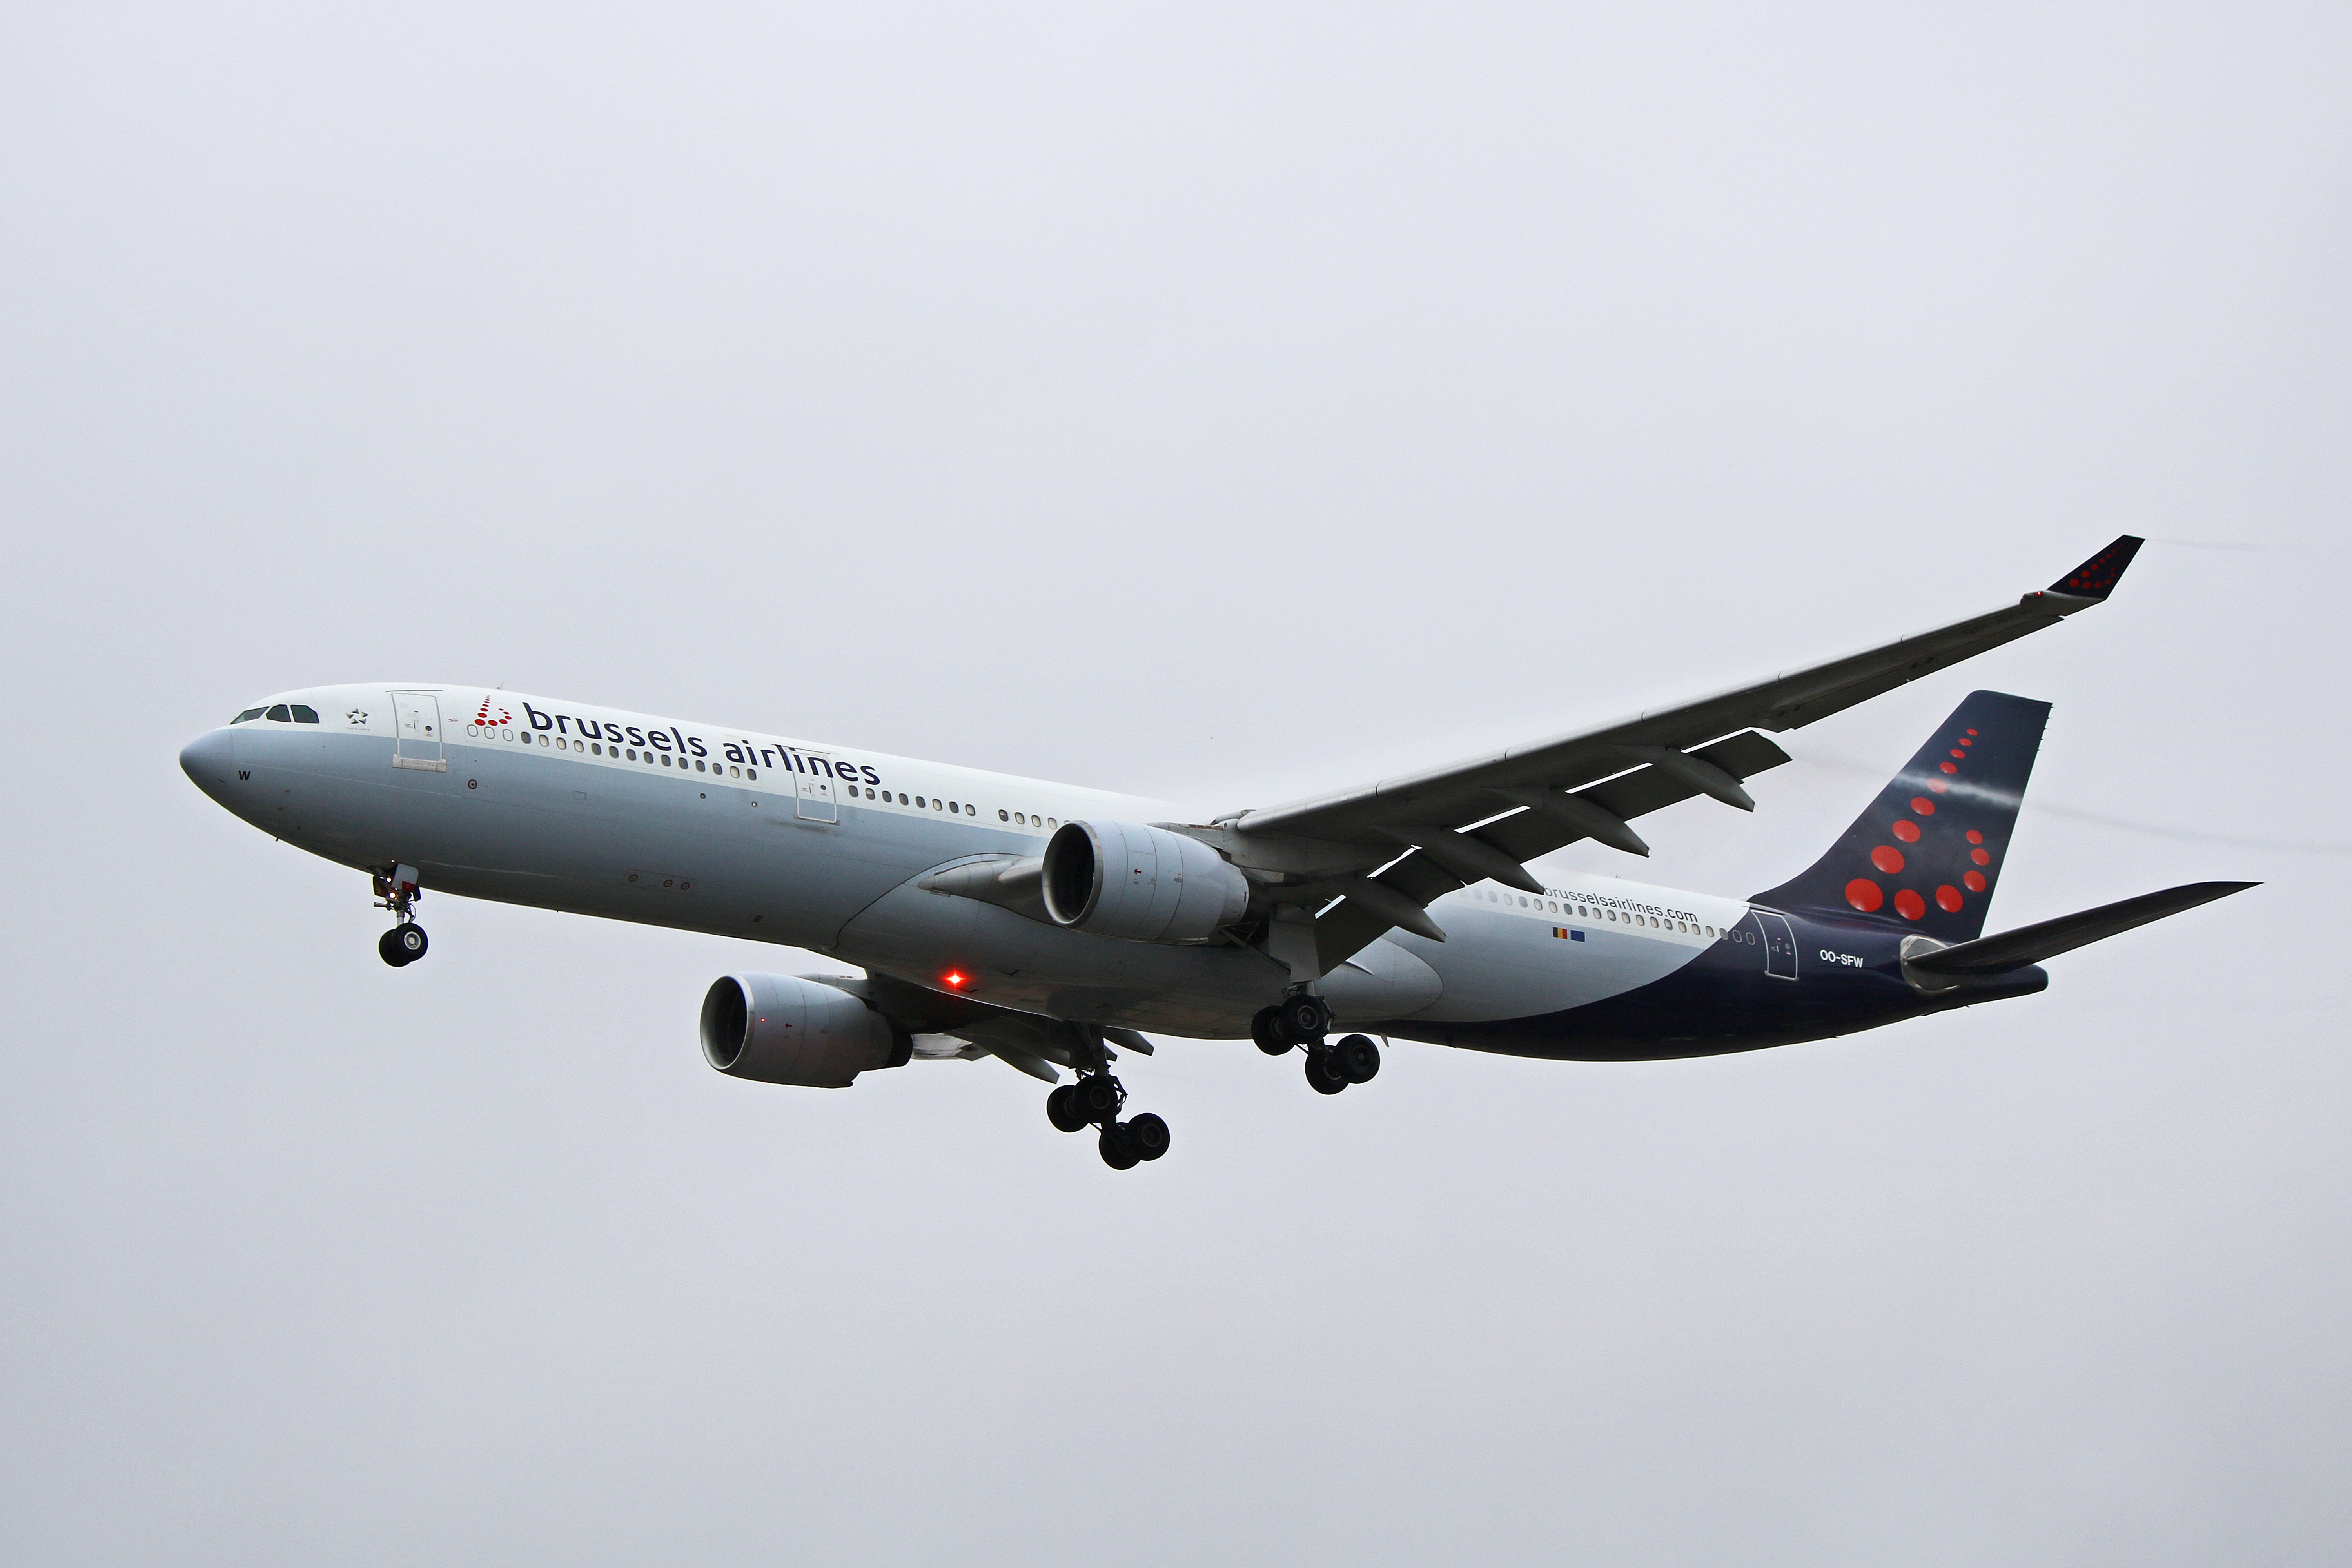 oo-sfw brussels airlines airbus a330-300 toronto pearson yyz